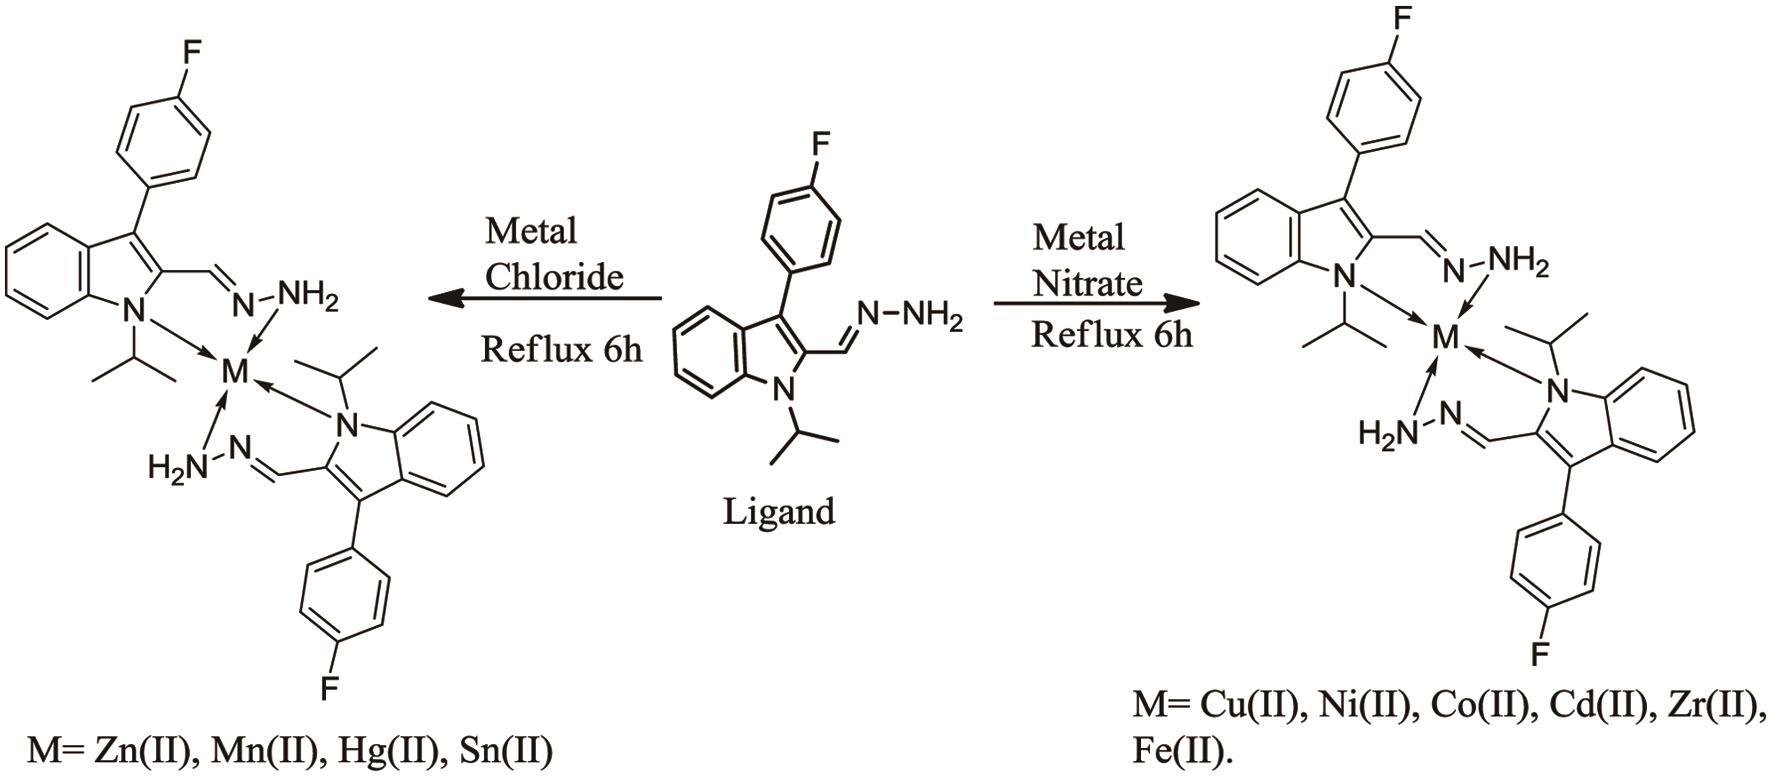 Synthesis of metal complexes.